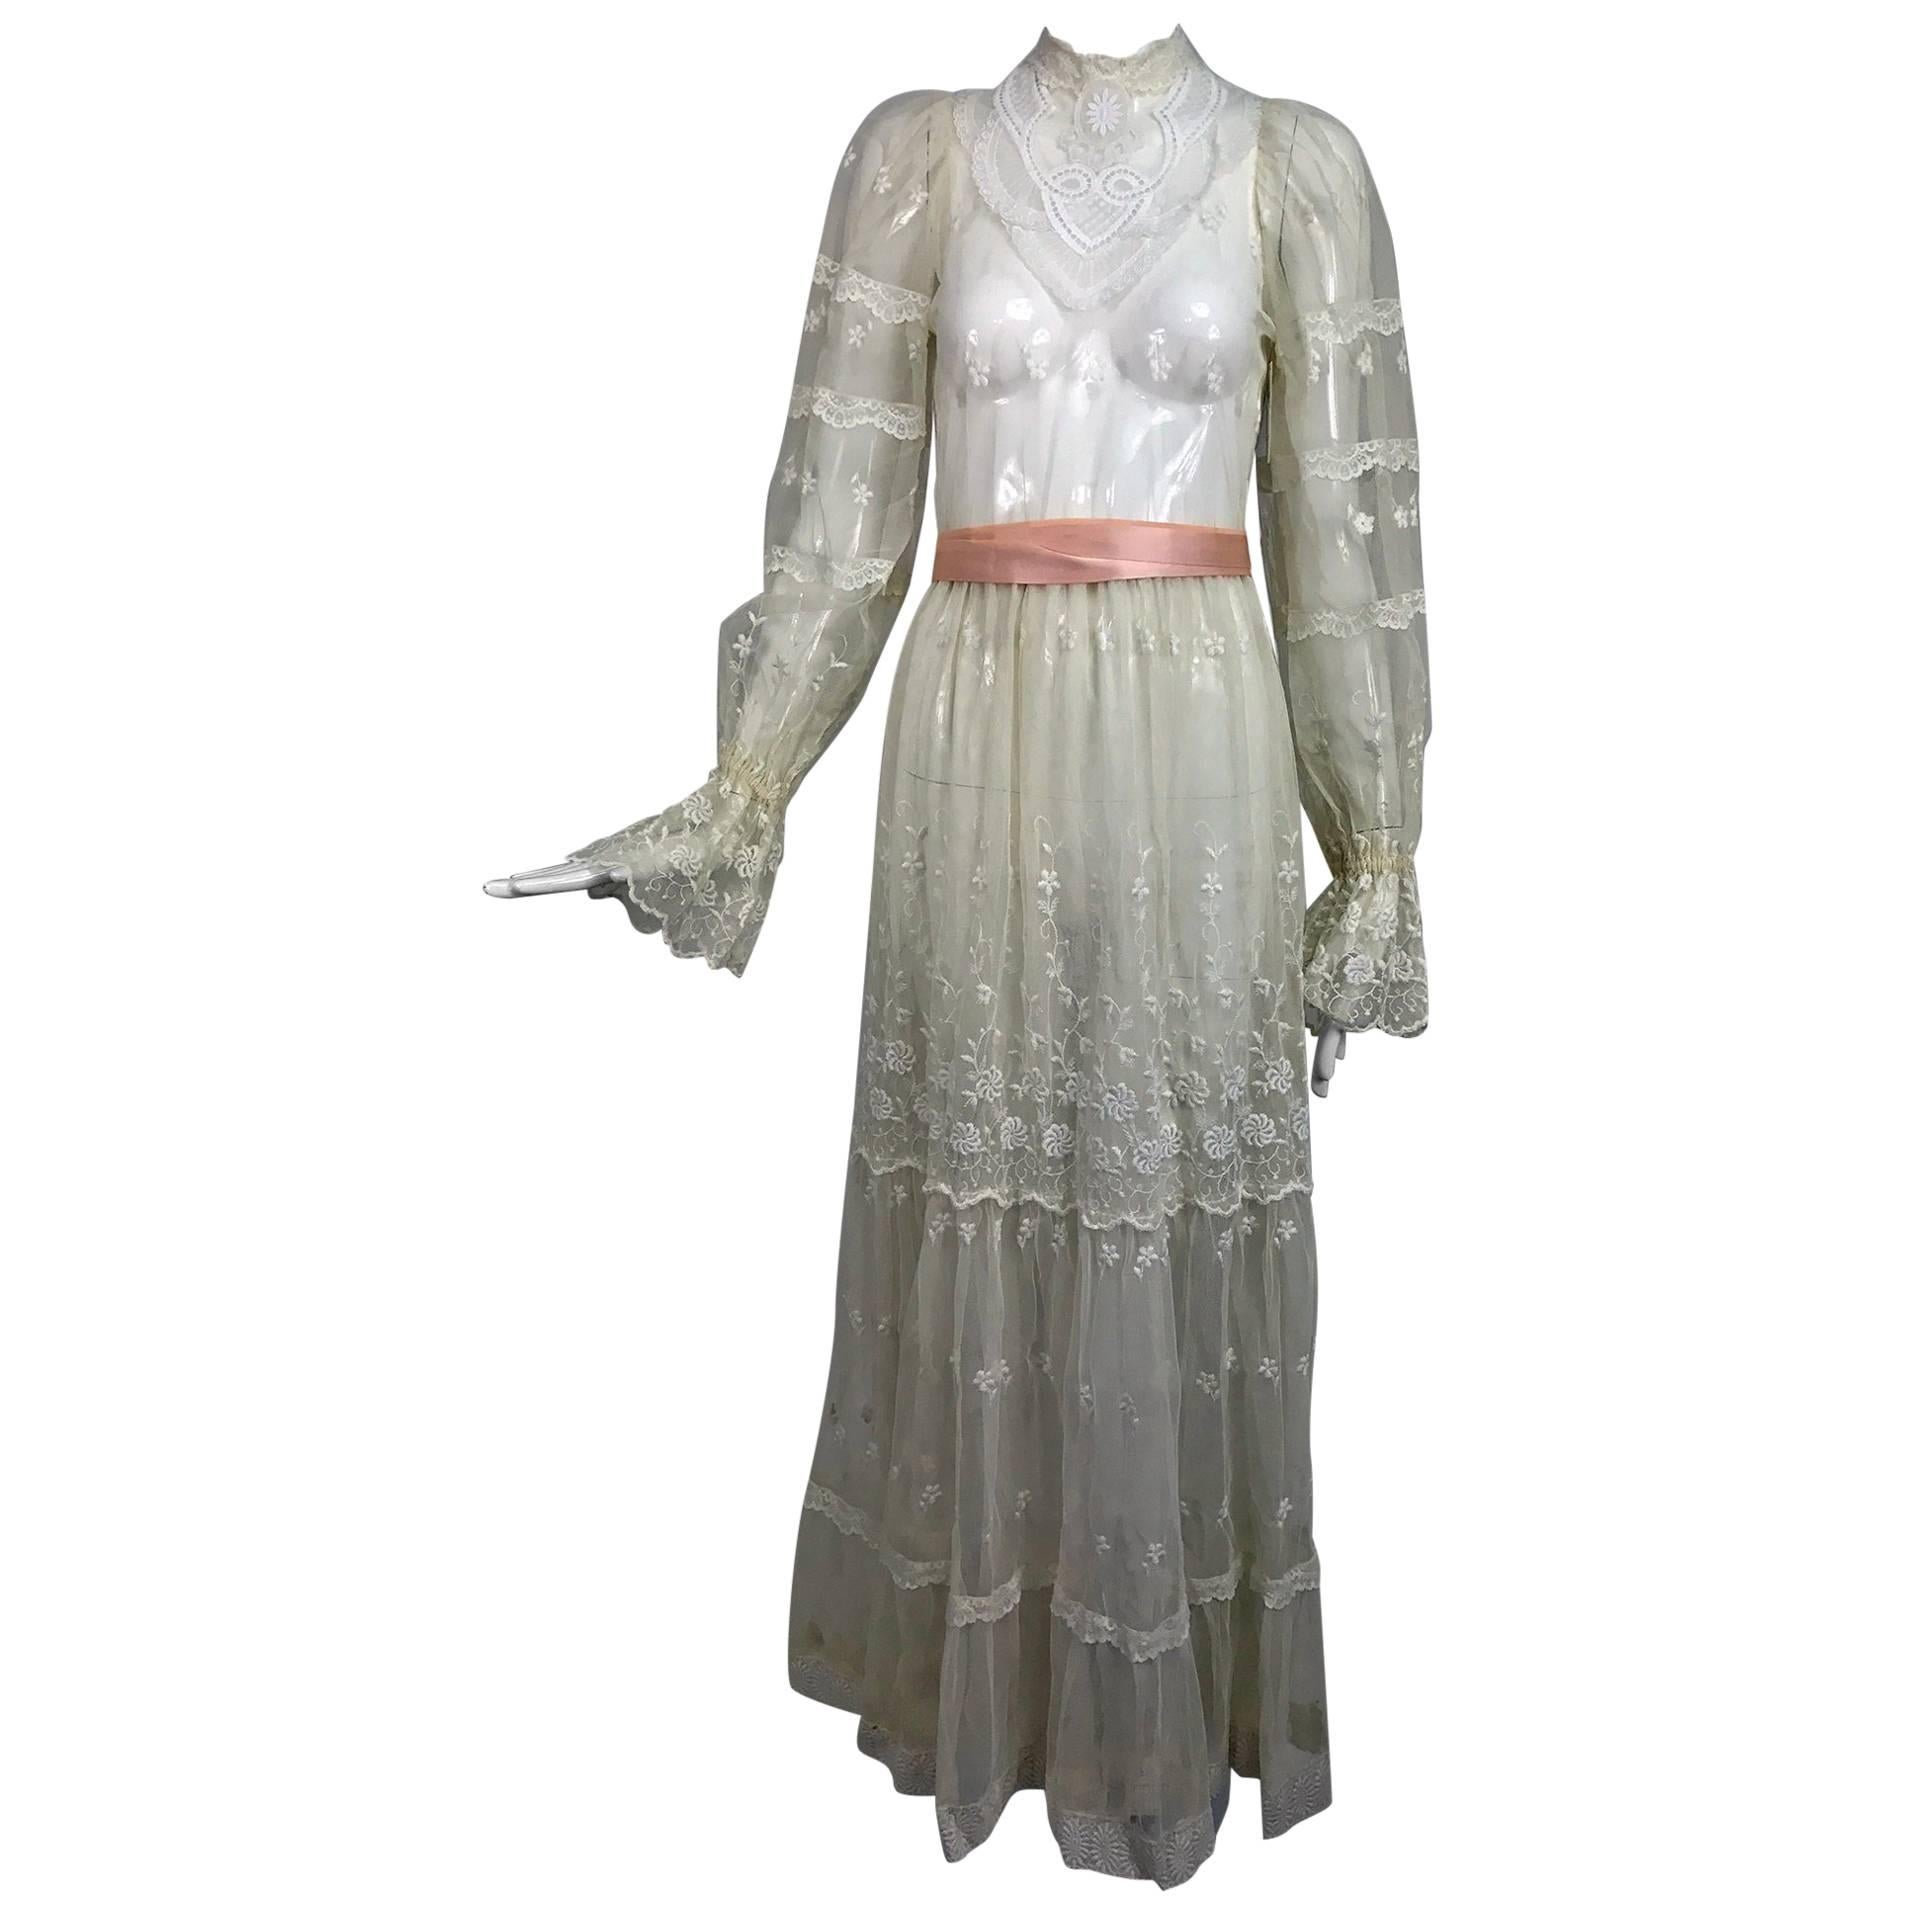 Vintage Victorian style ivory lace and tulle maxi dress 1970s wedding